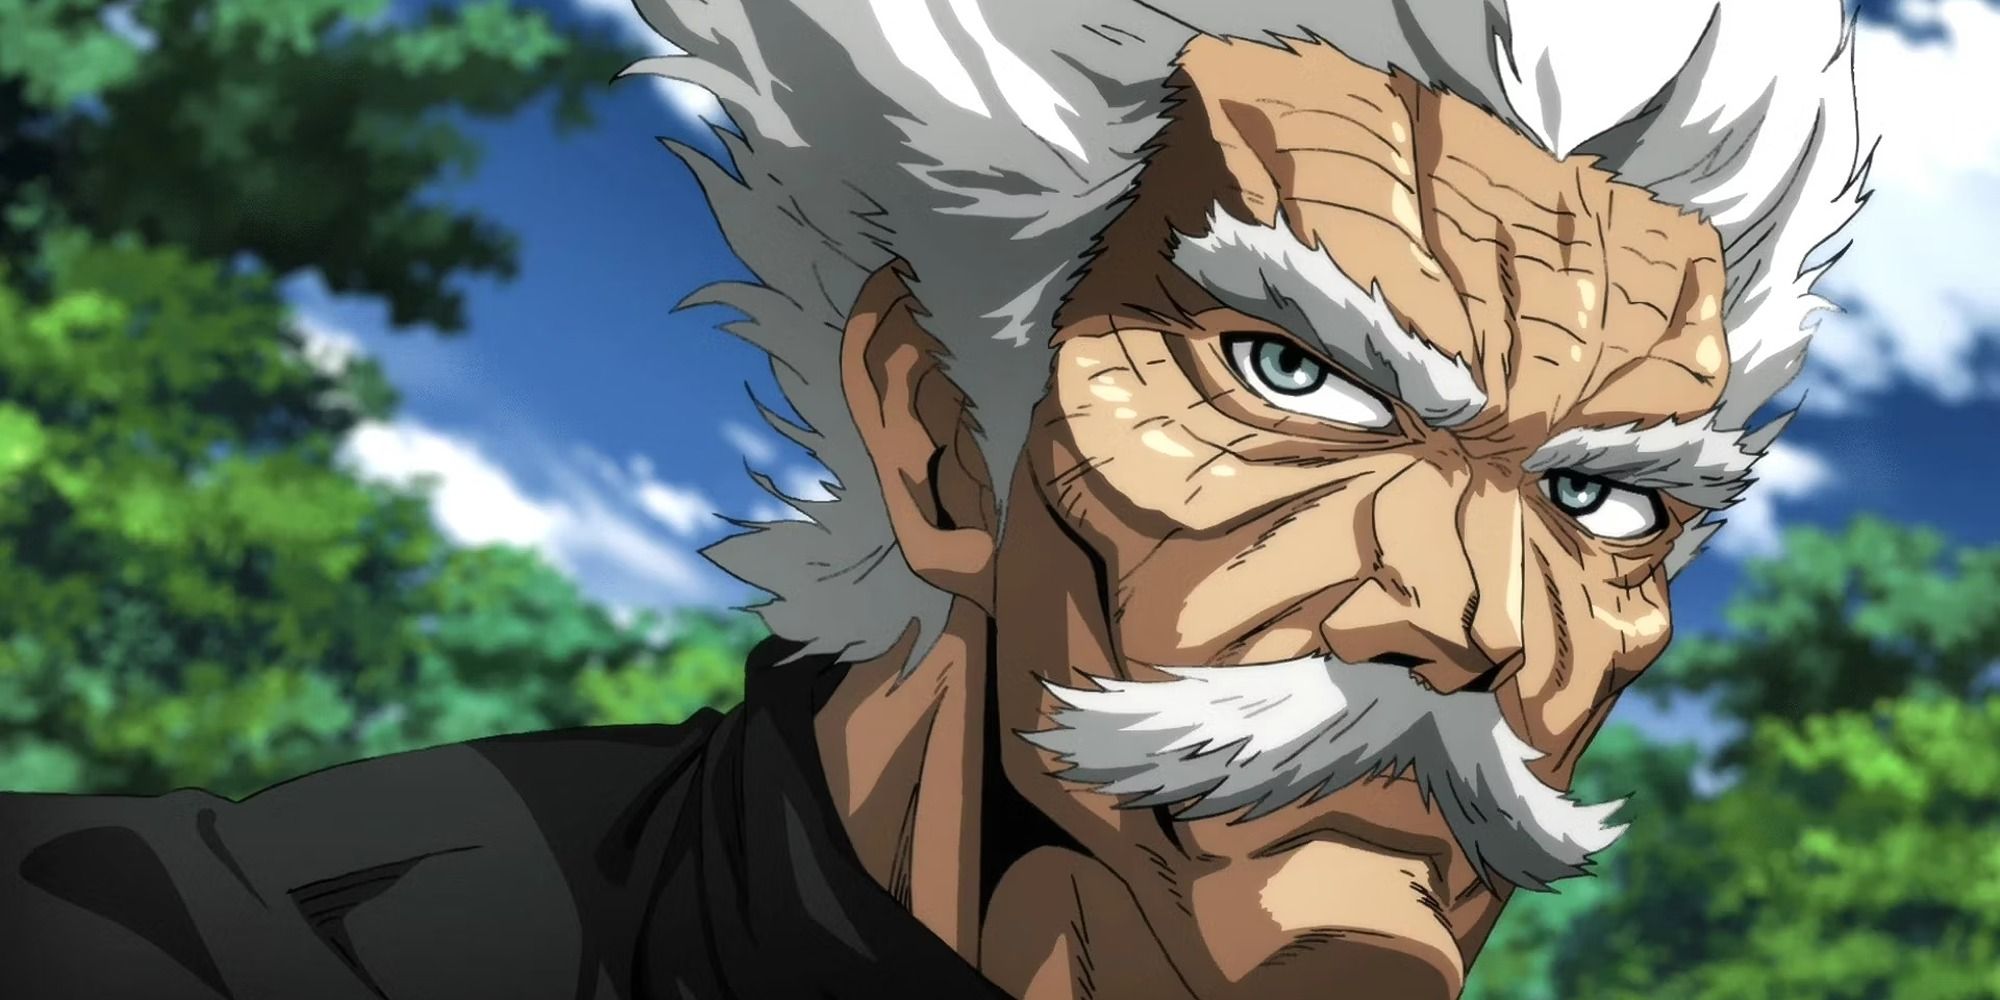 Bang is one of the strongest old men in anime